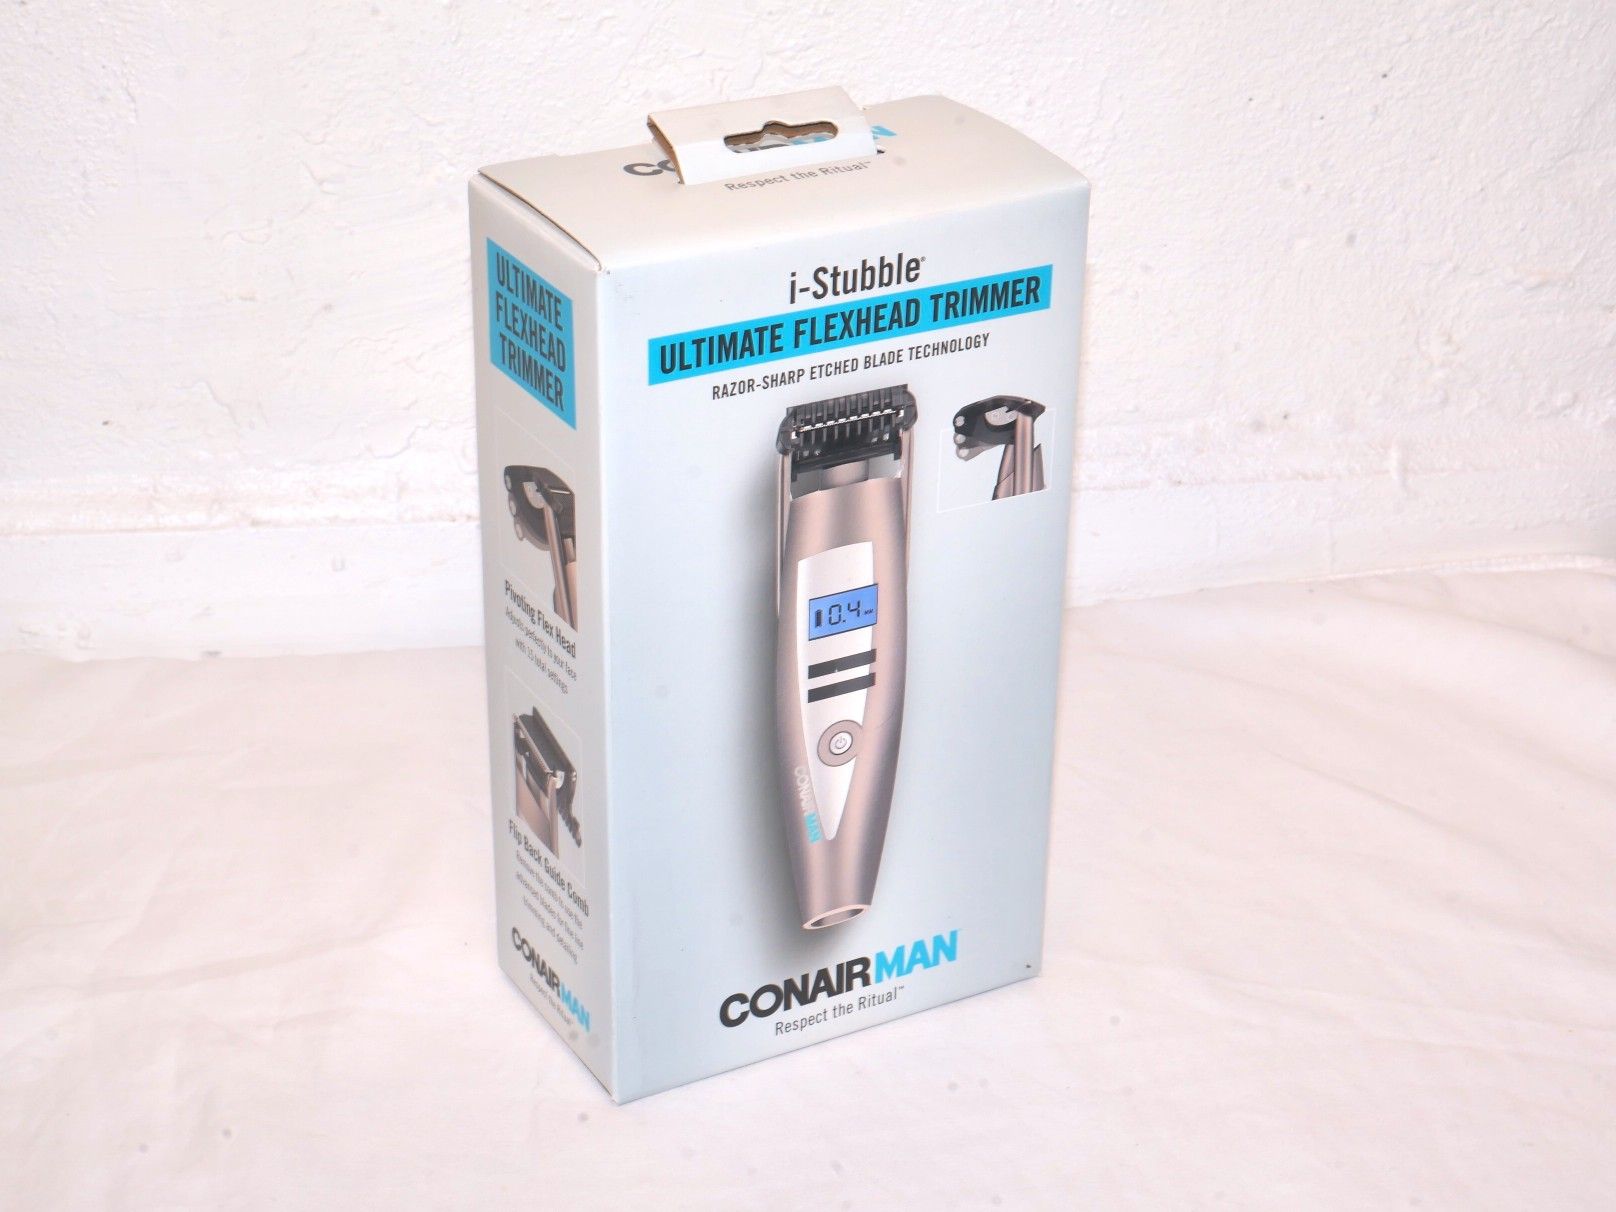 I-Stubble Ultimate Flexhead Trimmer - New